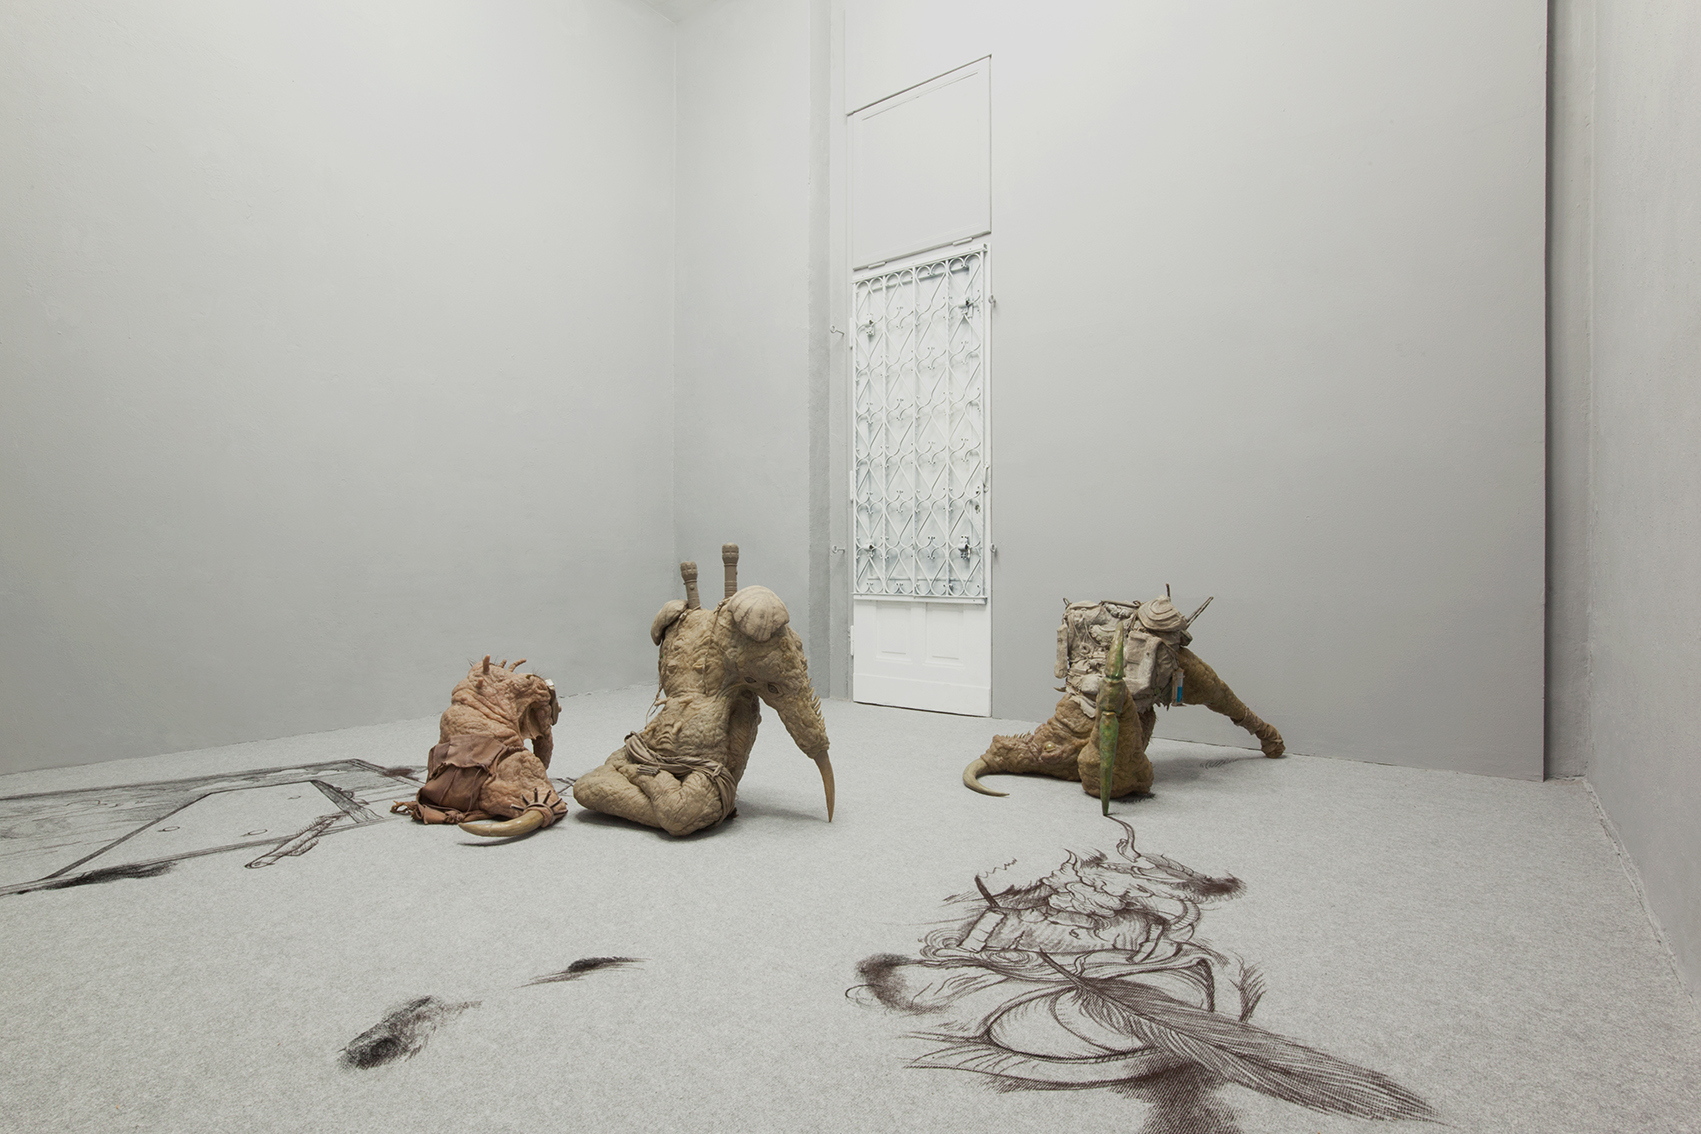 Installation view from Michele Gabrieleʼs Solo show ‘With the corner of the eyeʼ at Kunsthalle Ost, Leipzig DE